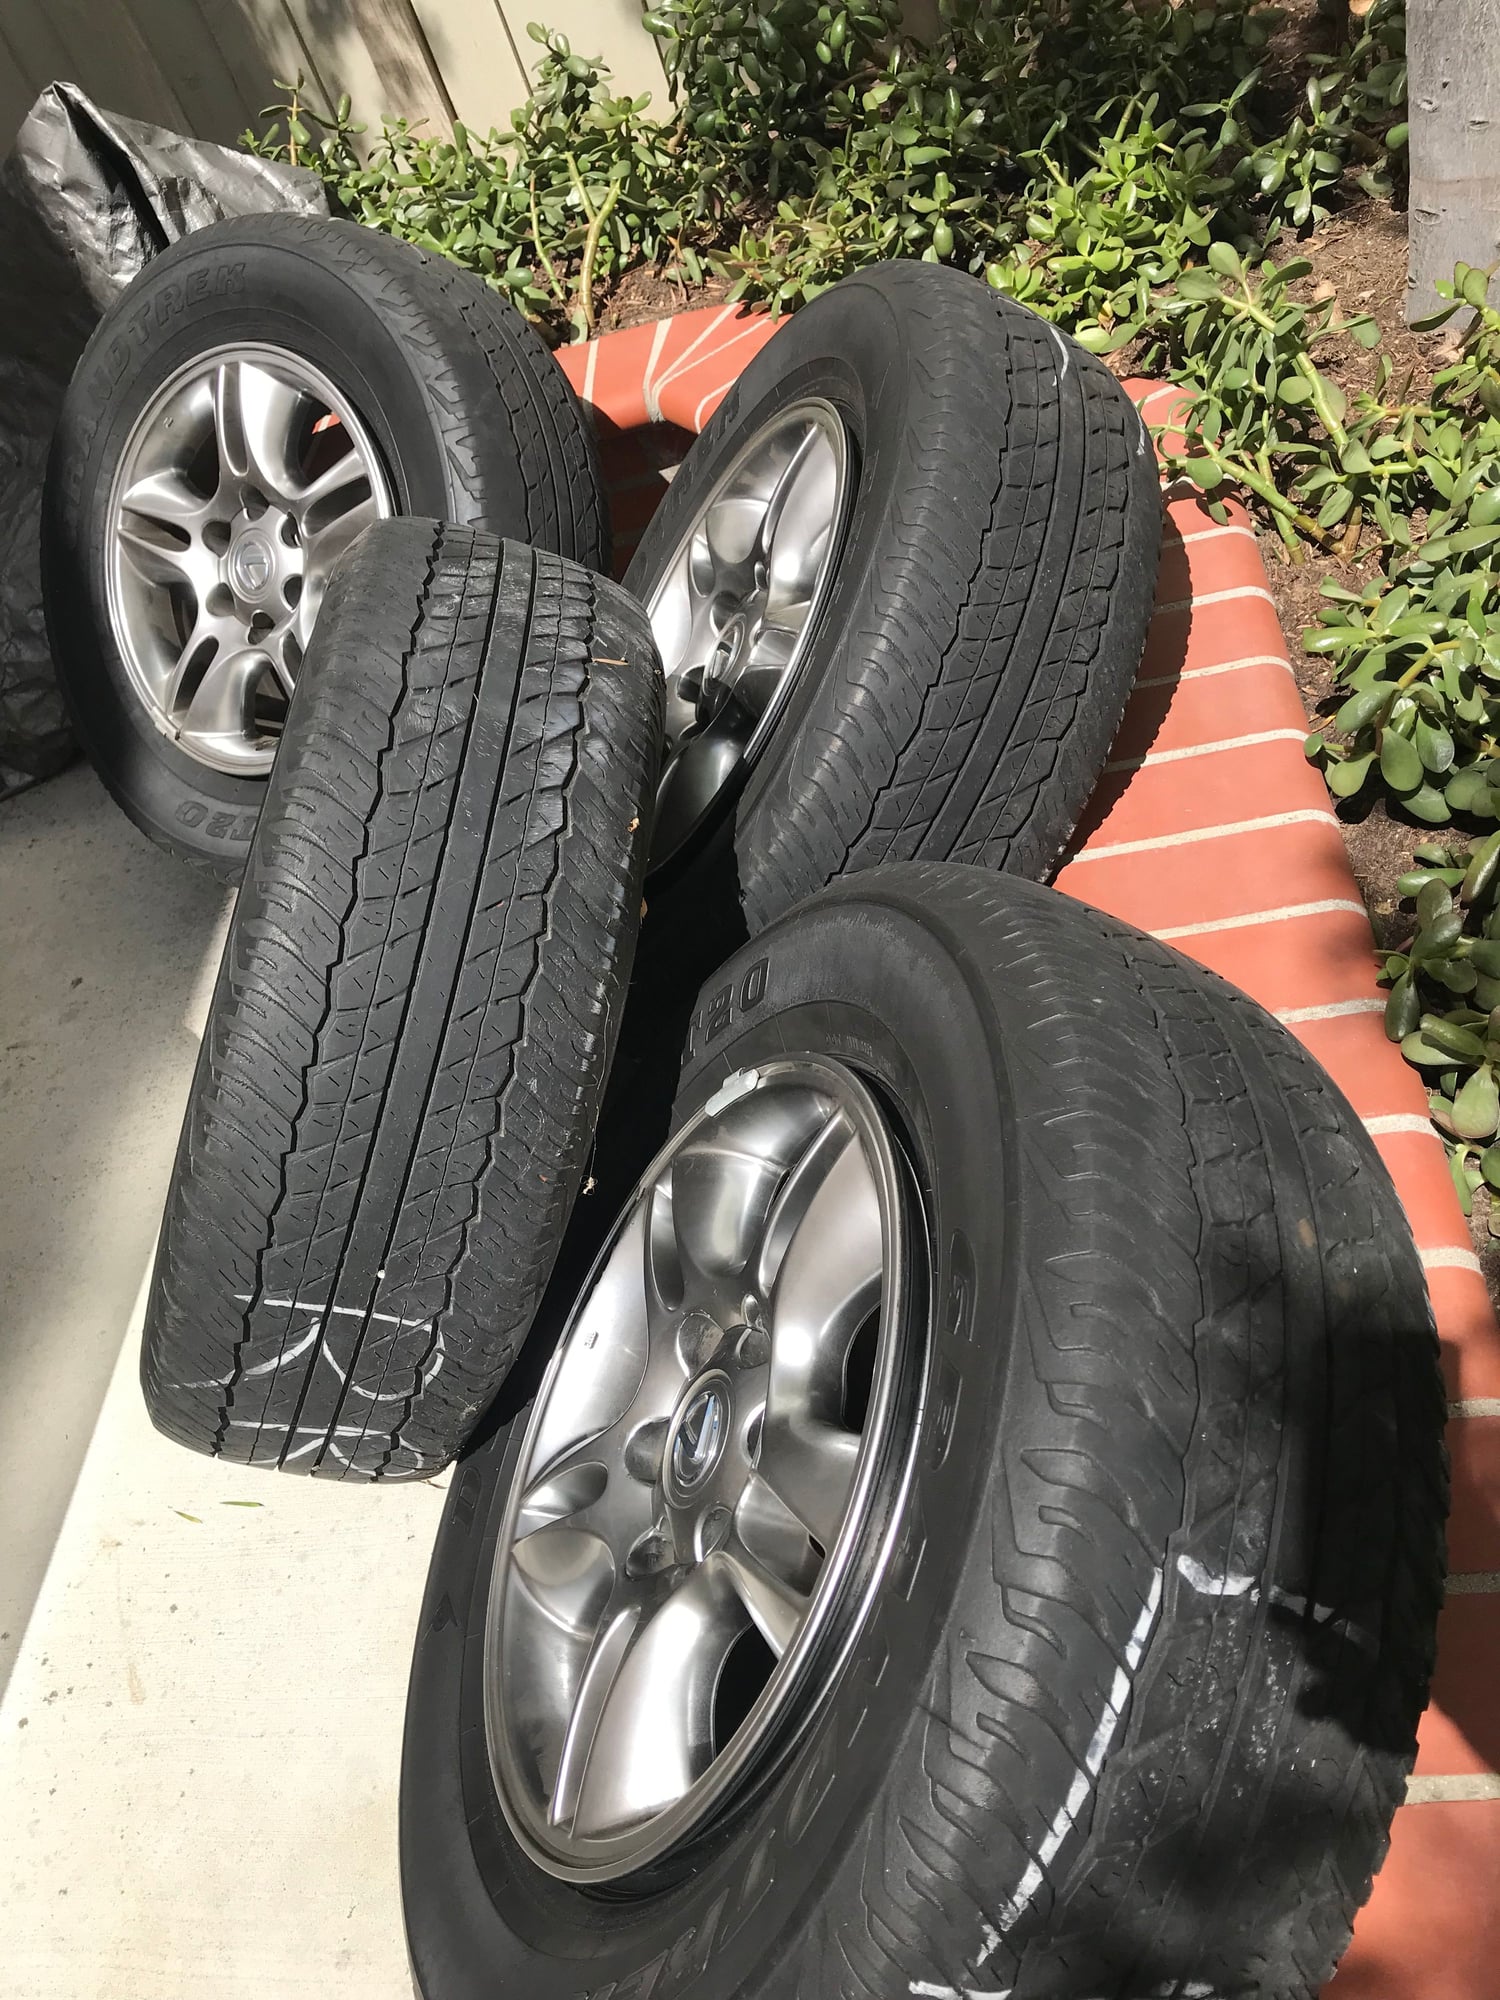 Wheels and Tires/Axles - OEM GX470 Wheels - graphite silver - Used - 2003 to 2008 Lexus GX470 - Torrance, CA 90503, United States